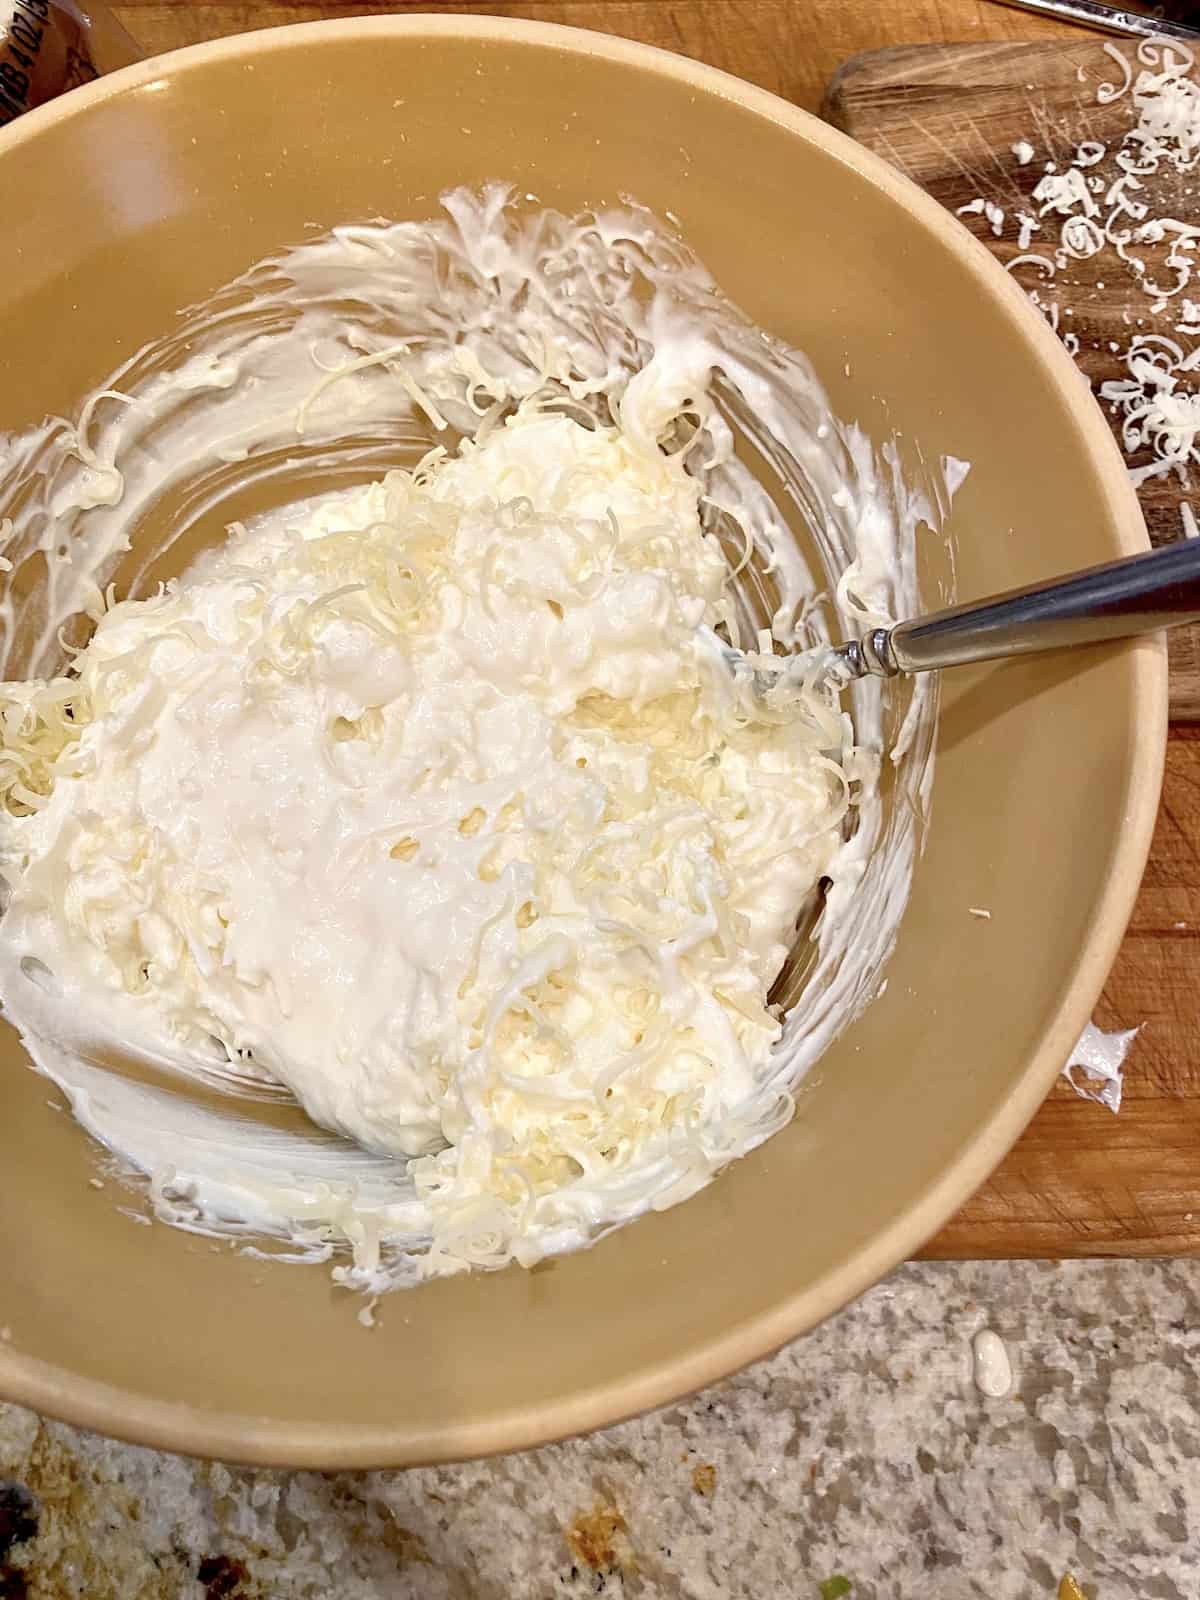 Creamy ingredients in a small bowl with a spoon.